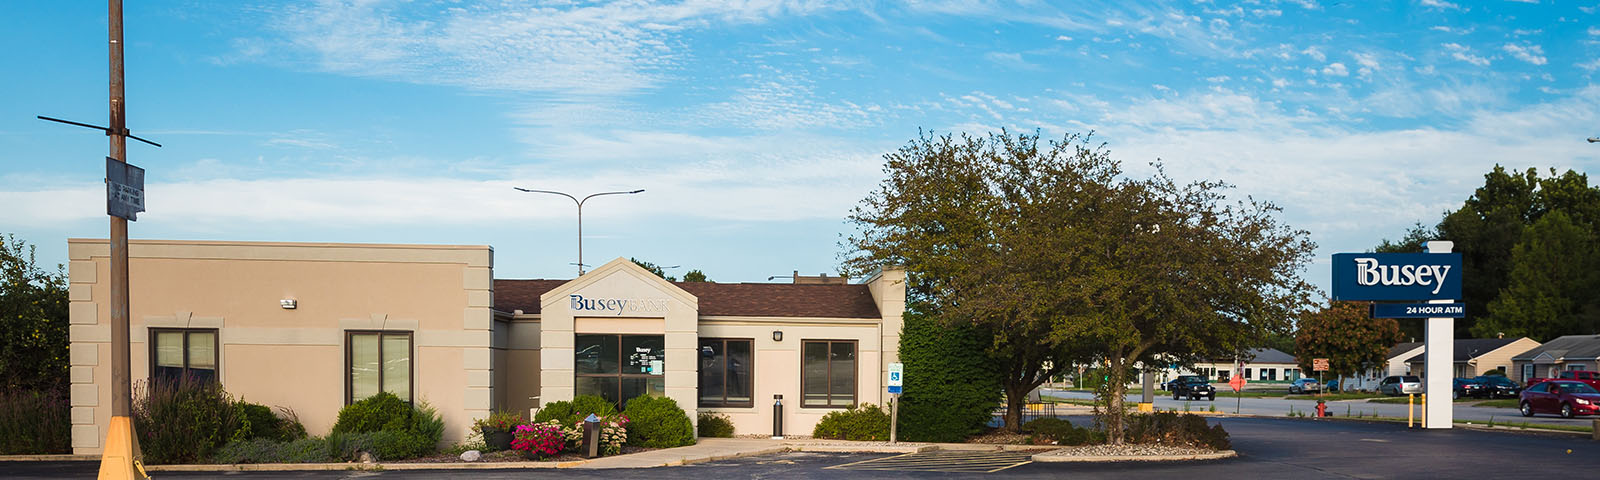 Busey Bank Service Center of Rantoul, IL